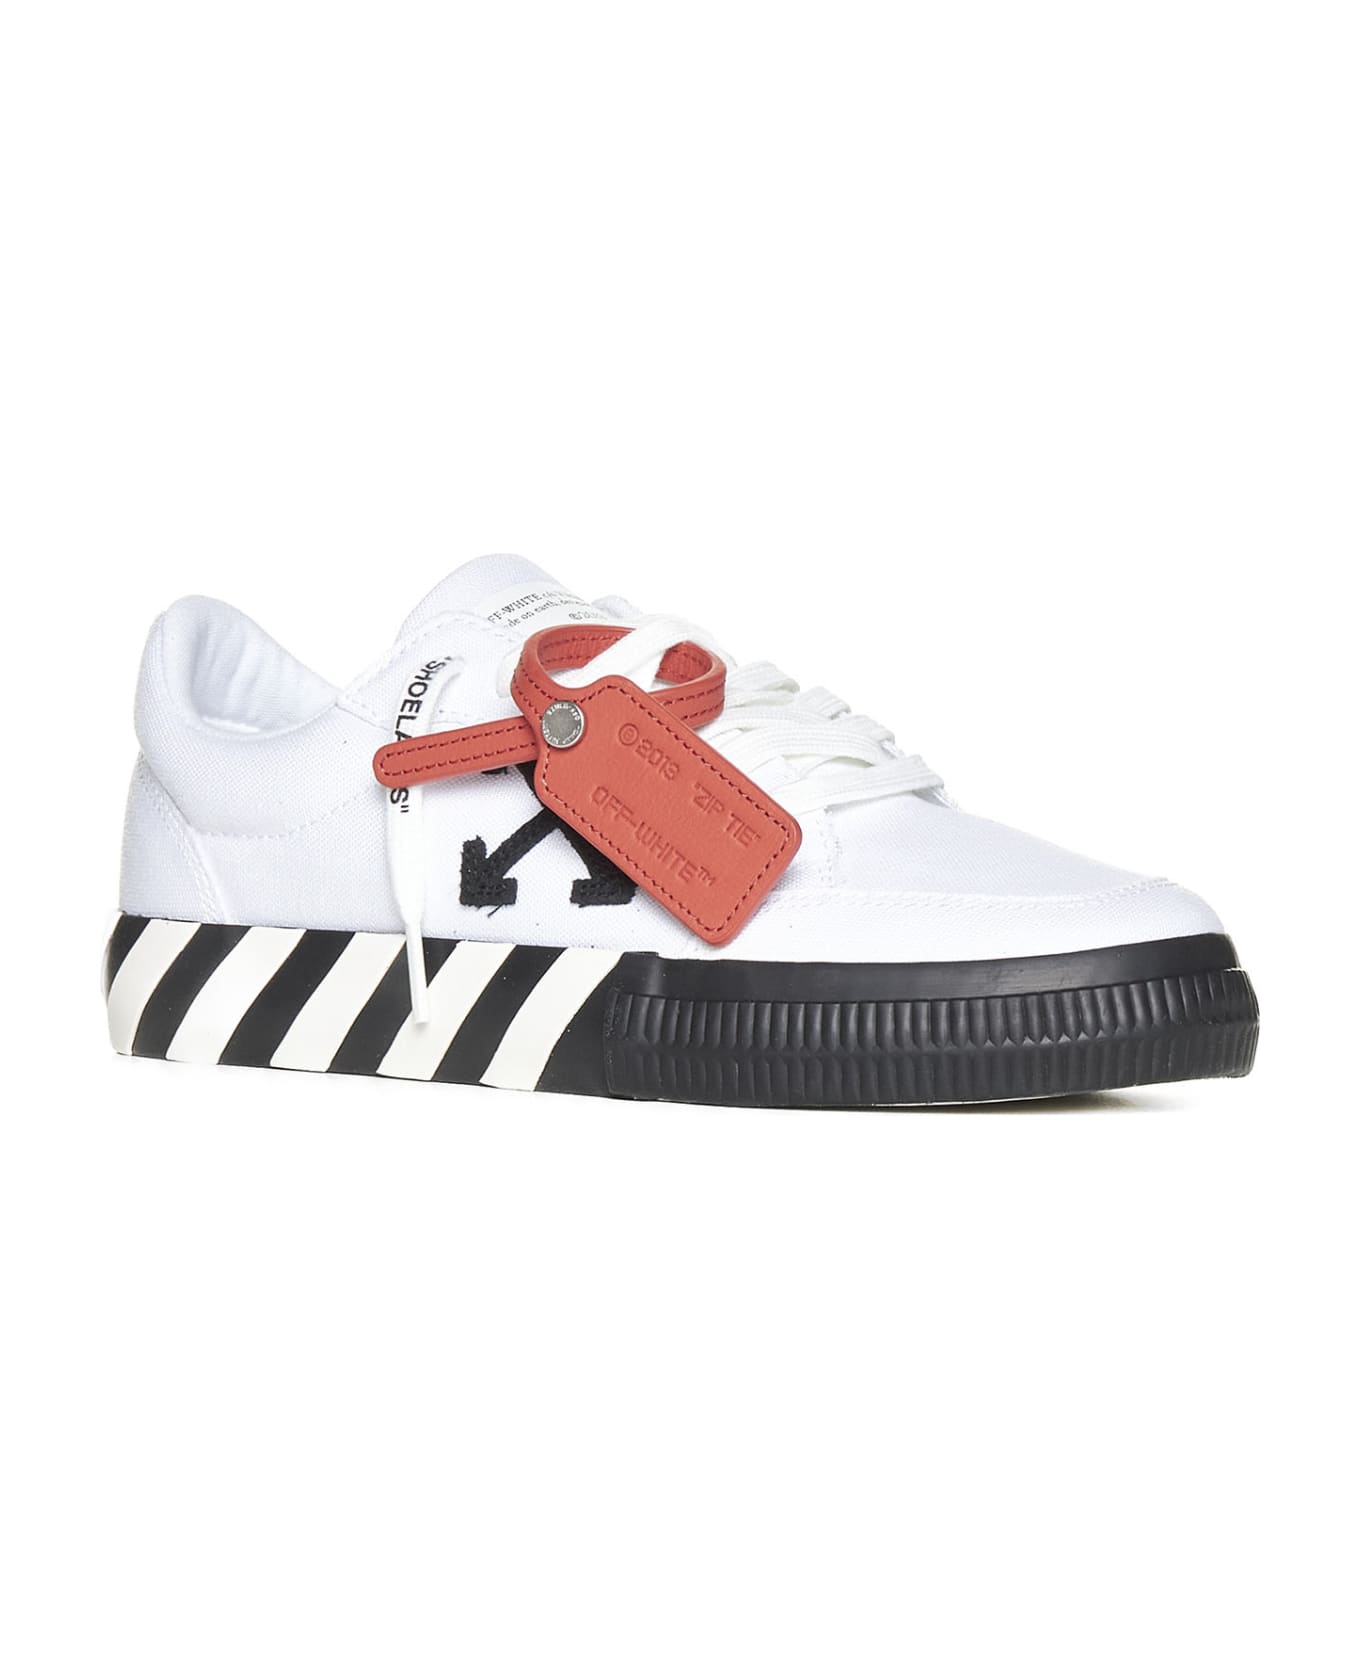 Off-White Low Vulcanized Canvas Sneakers - White Black